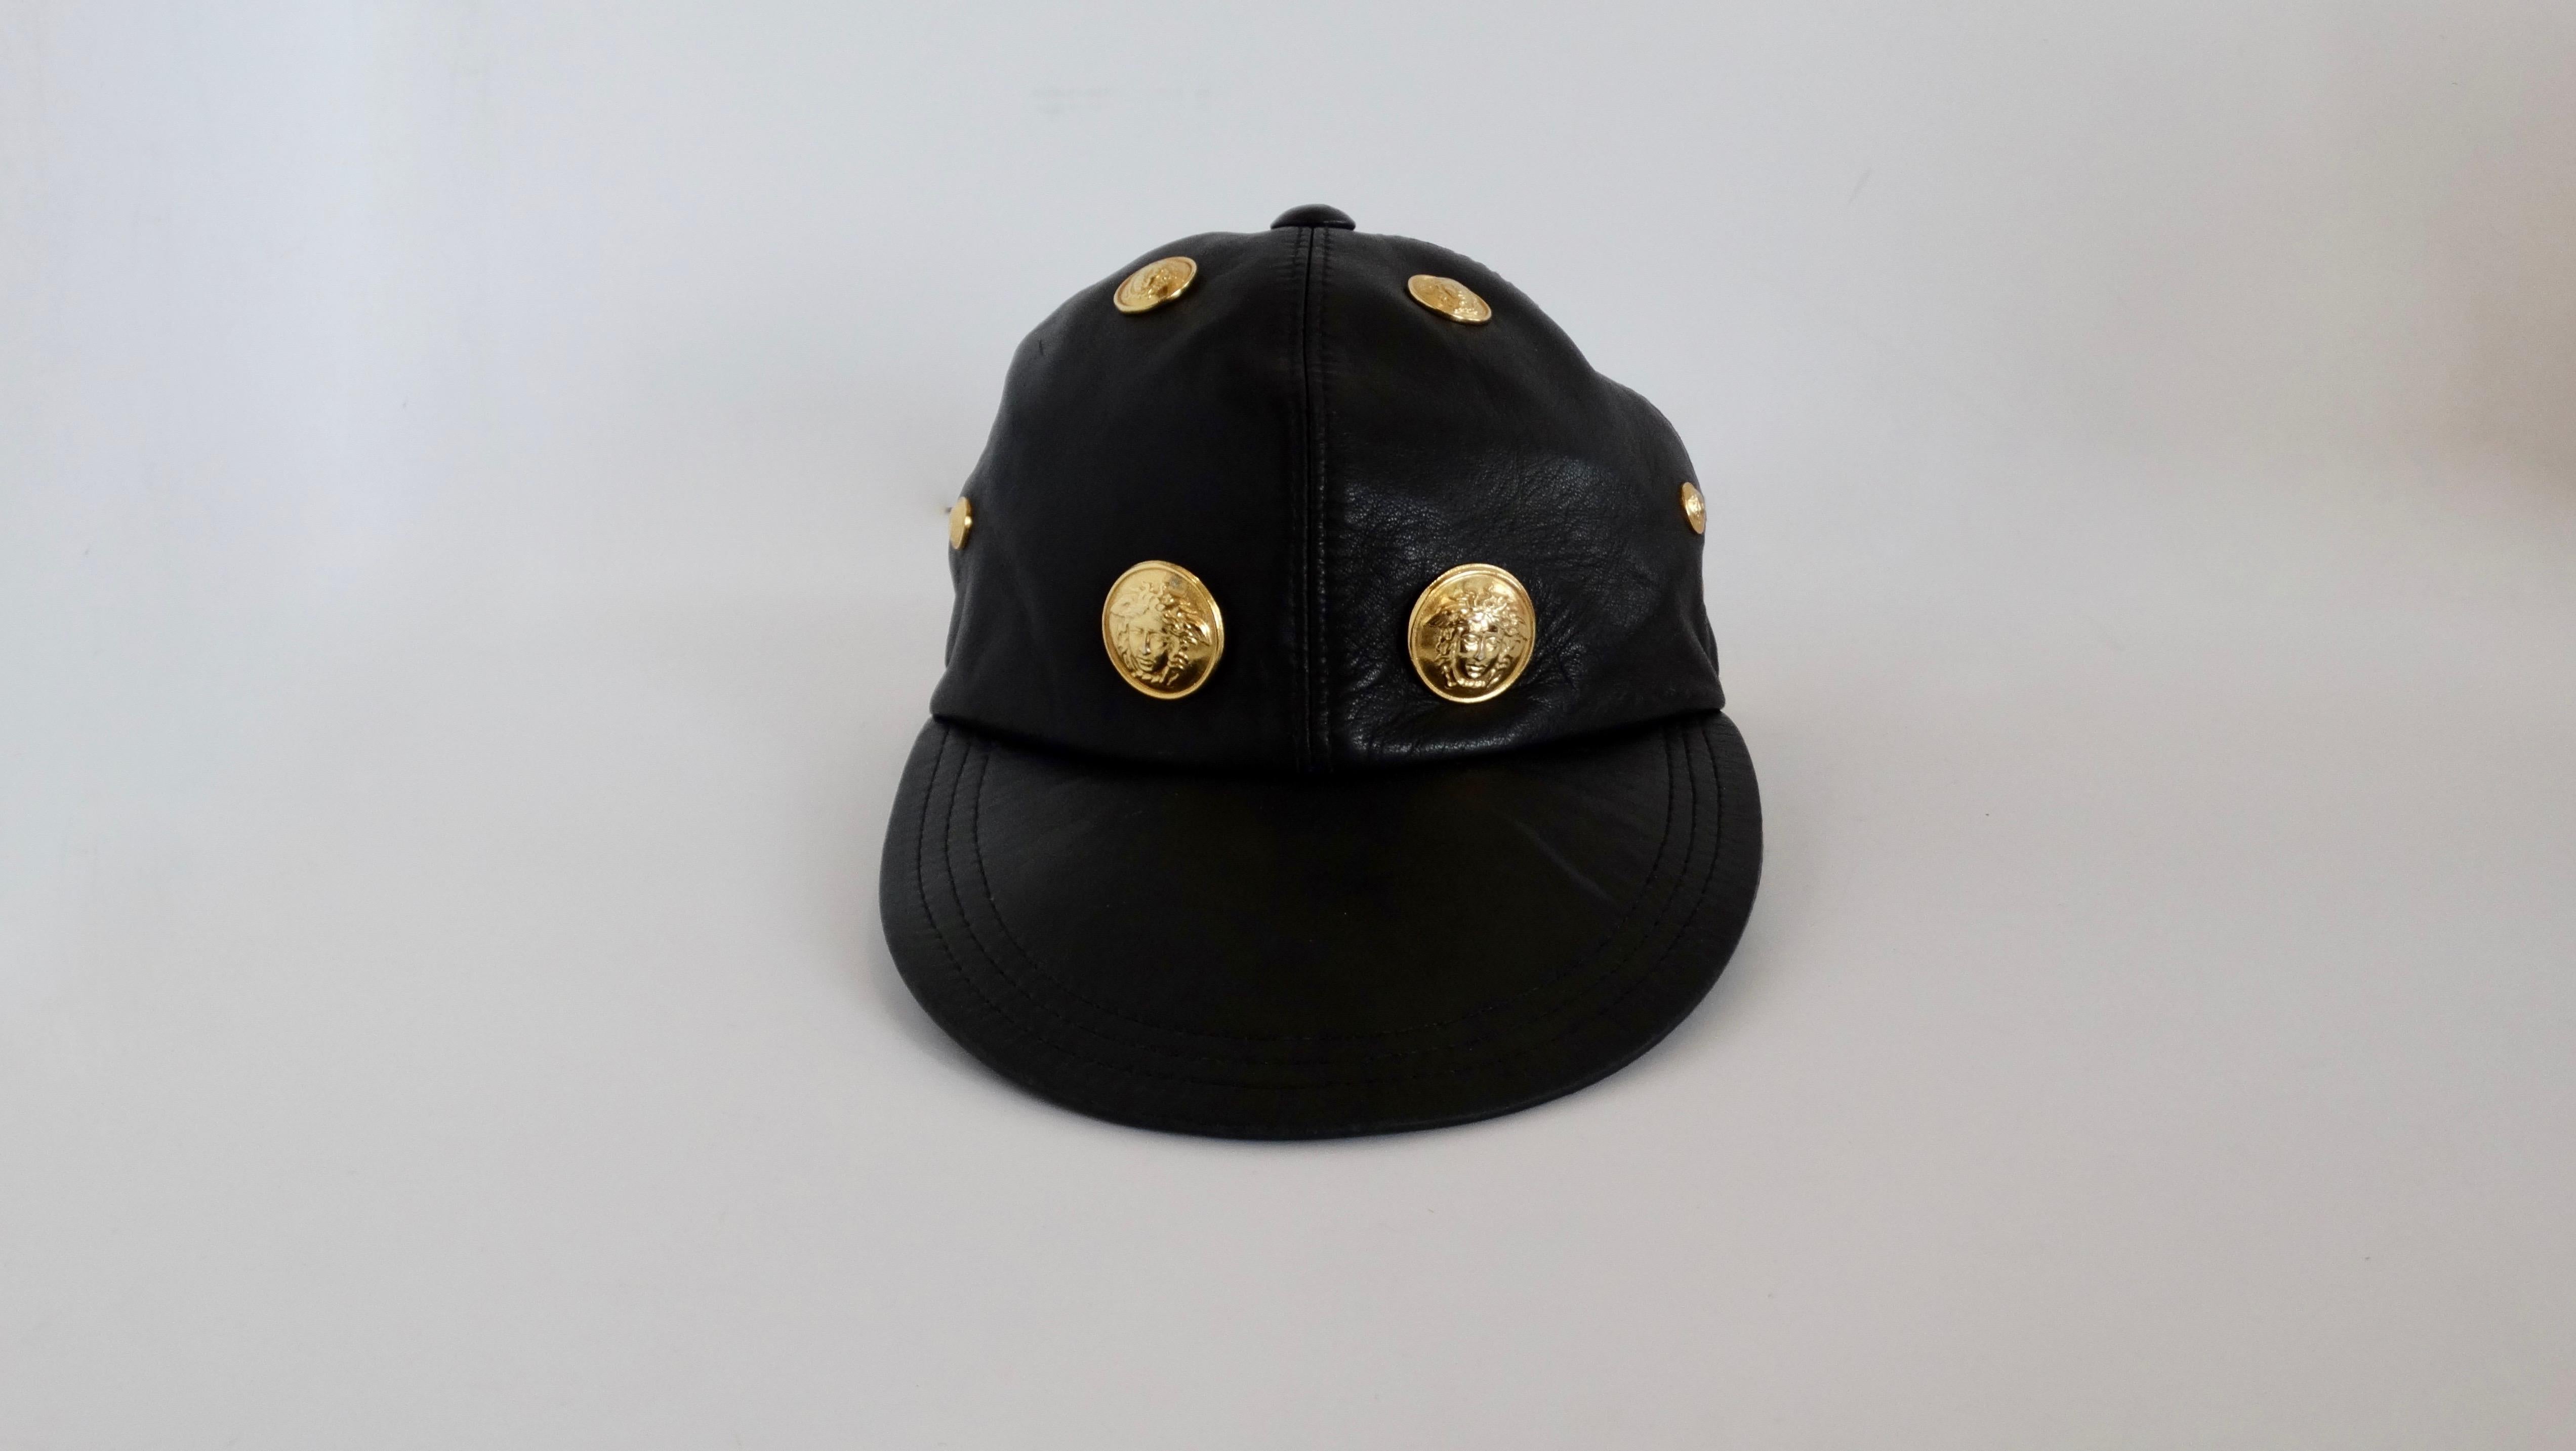 Add a touch of 90s Versace to your look with this amazing Gianni Versace hat! Circa early 1990s, this hat is crafted from ultra soft black leather and features a flat bill. Cap is adorned with various sizes of gold Medusa heads. Perfect to throw on